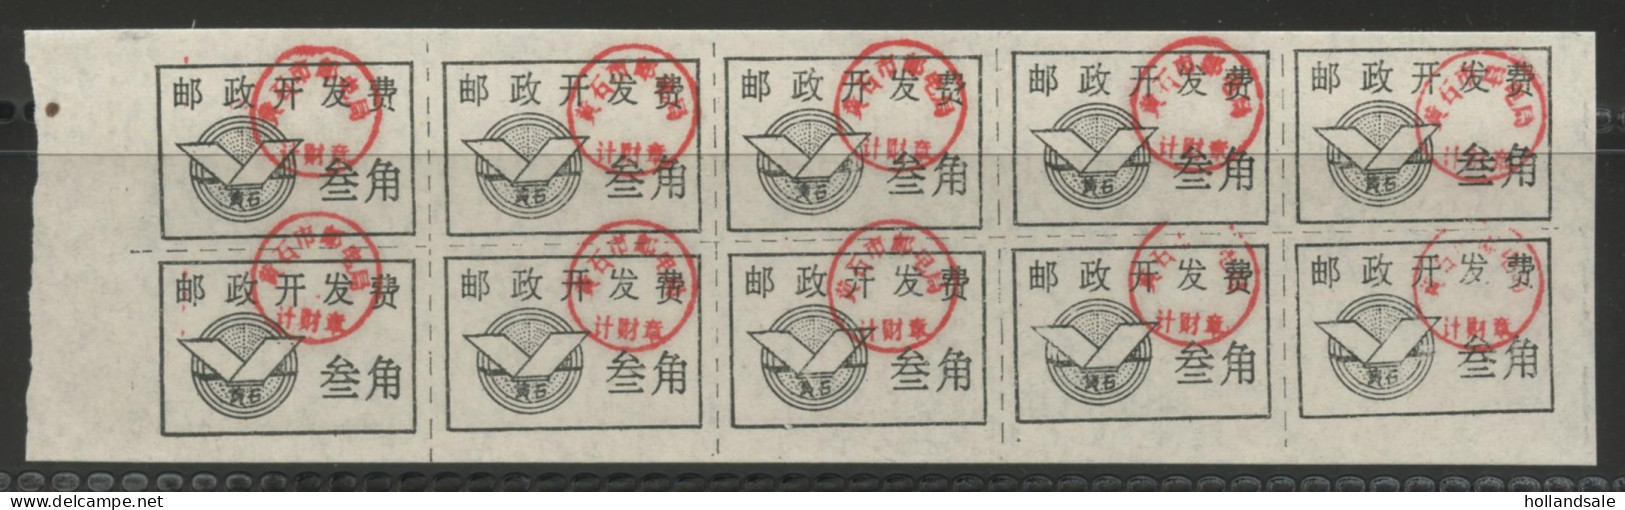 CHINA PRC / ADDED CHARGE - Labels Of Huangshi City, Hubei Prov. D&O 12-0167.  Block Of 10. - Postage Due